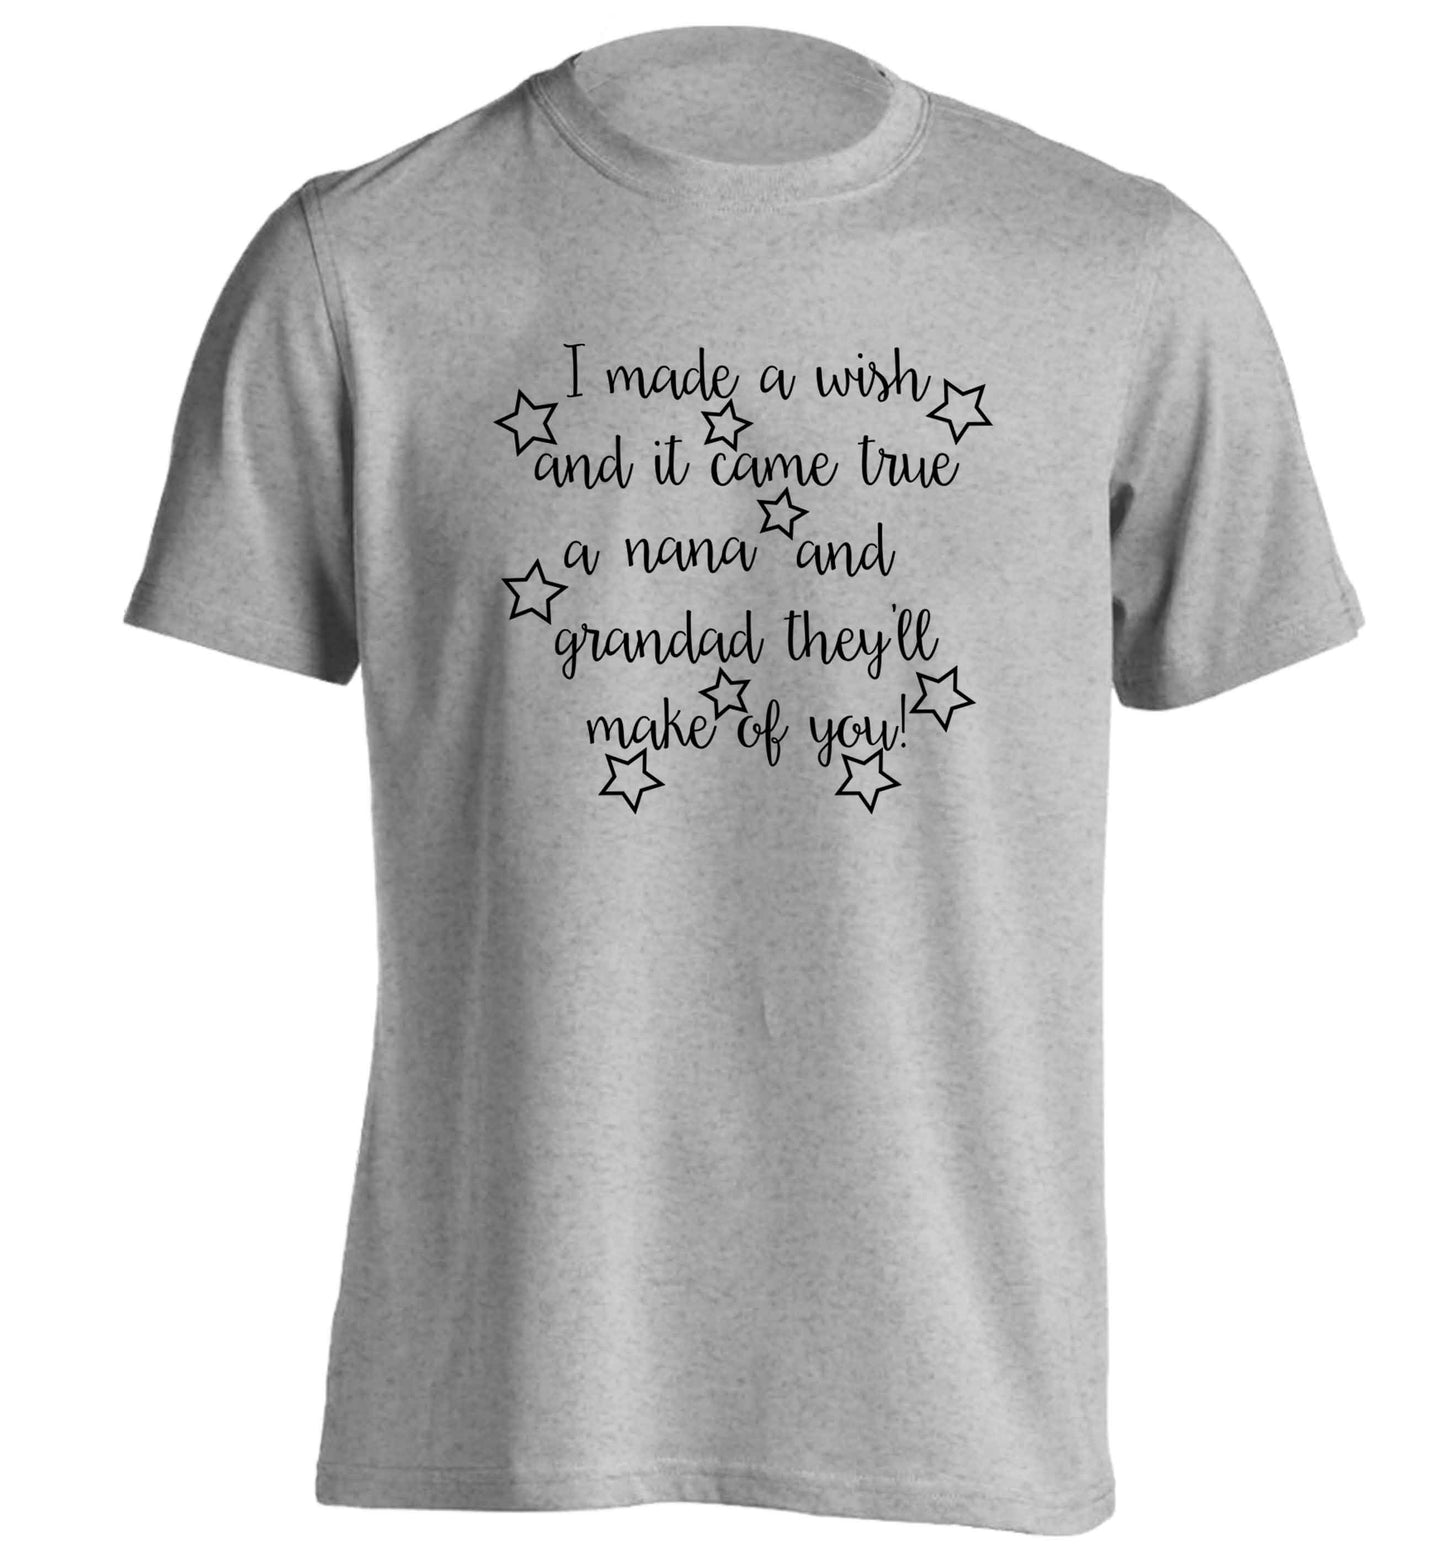 I made a wish and it came true a nana and grandad they'll make of you! adults unisex grey Tshirt 2XL